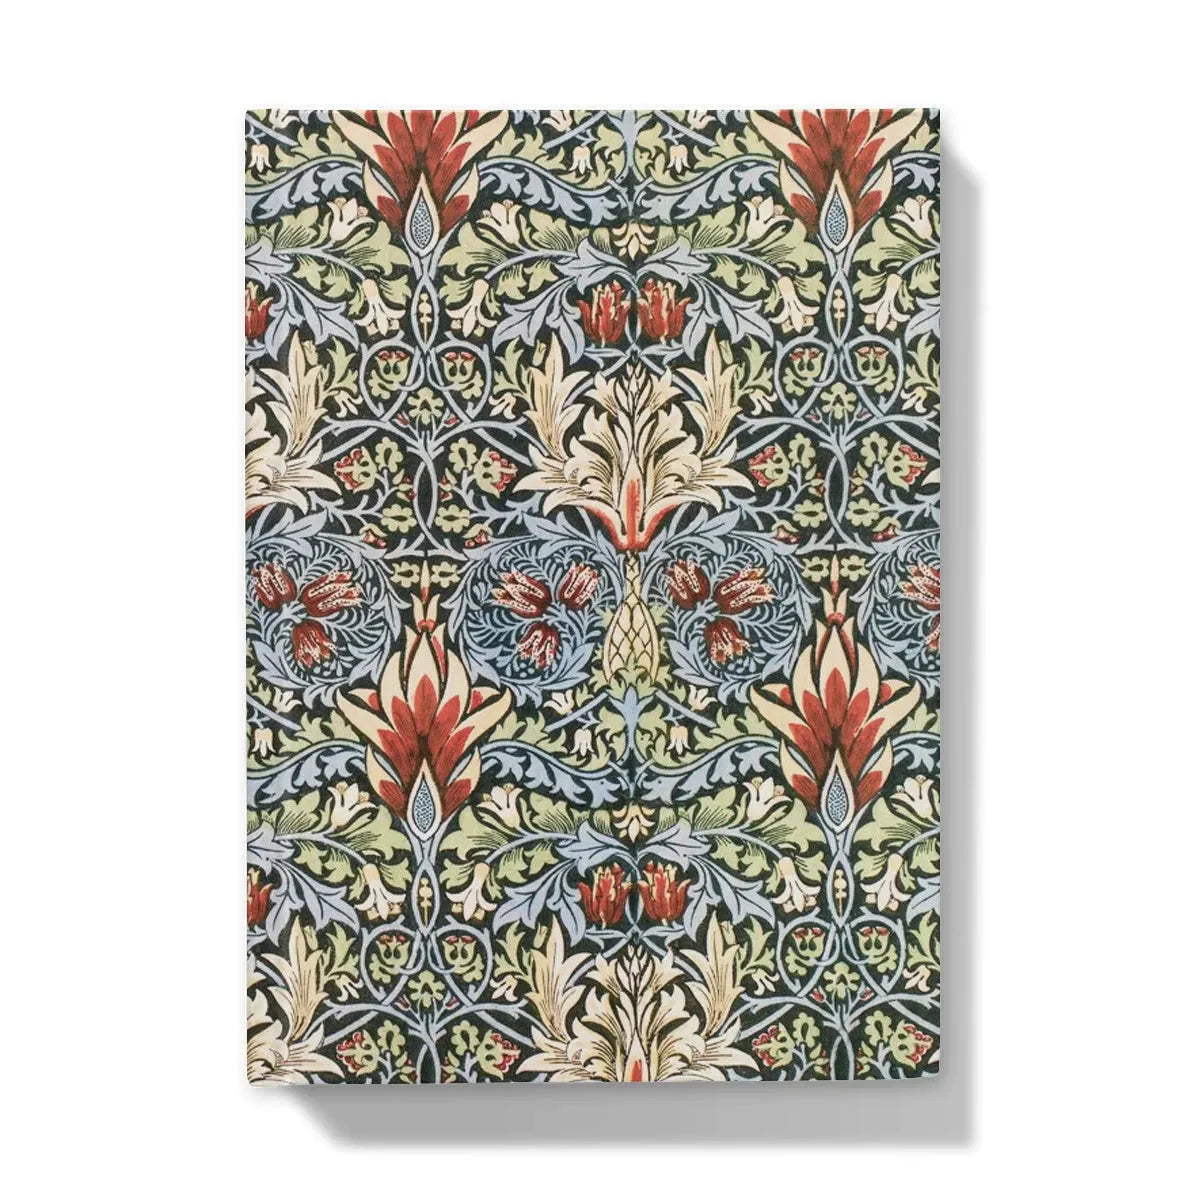 Snakeshead By William Morris Hardback Journal - 5’x7’ / 5’ x 7’ - Lined Paper - Notebooks & Notepads - Aesthetic Art